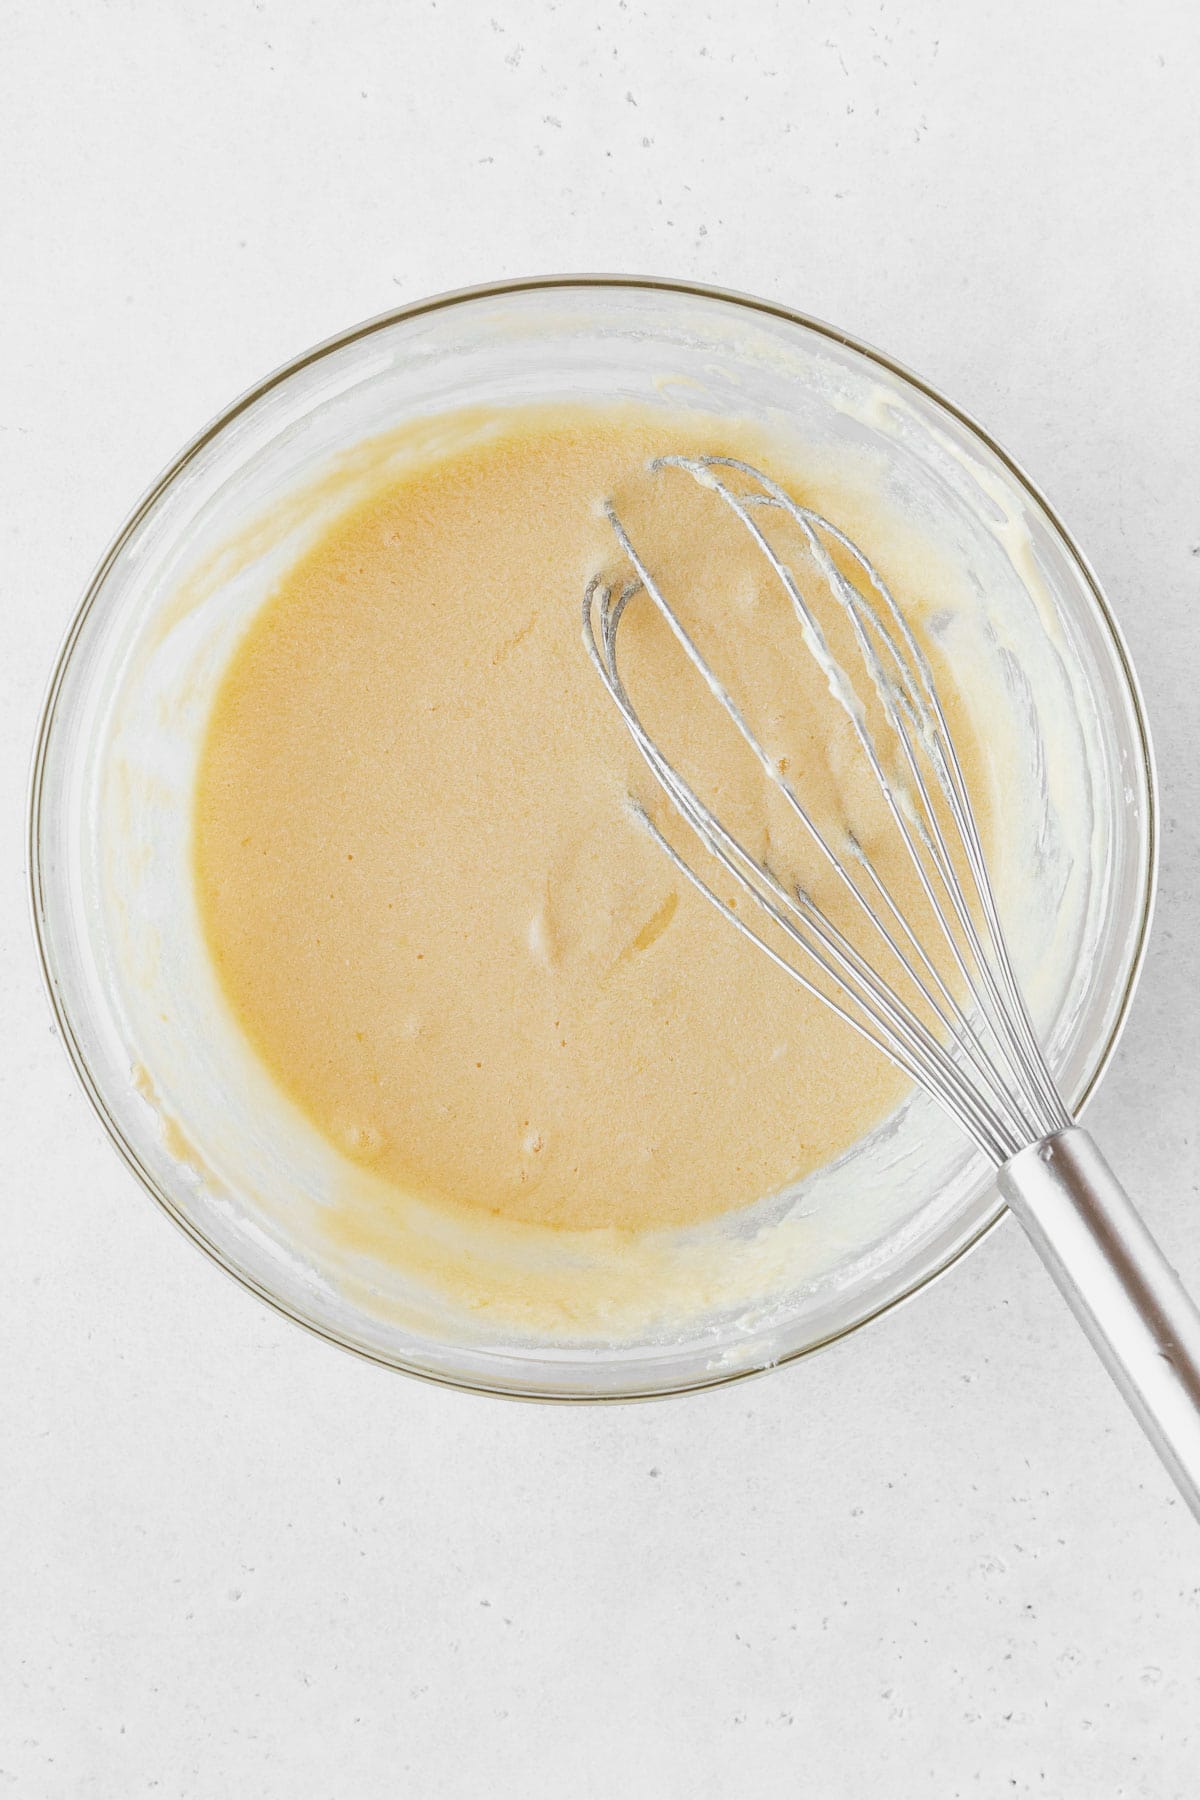 Lemon curd ingredients mixed together in a glass bowl with a whisk.